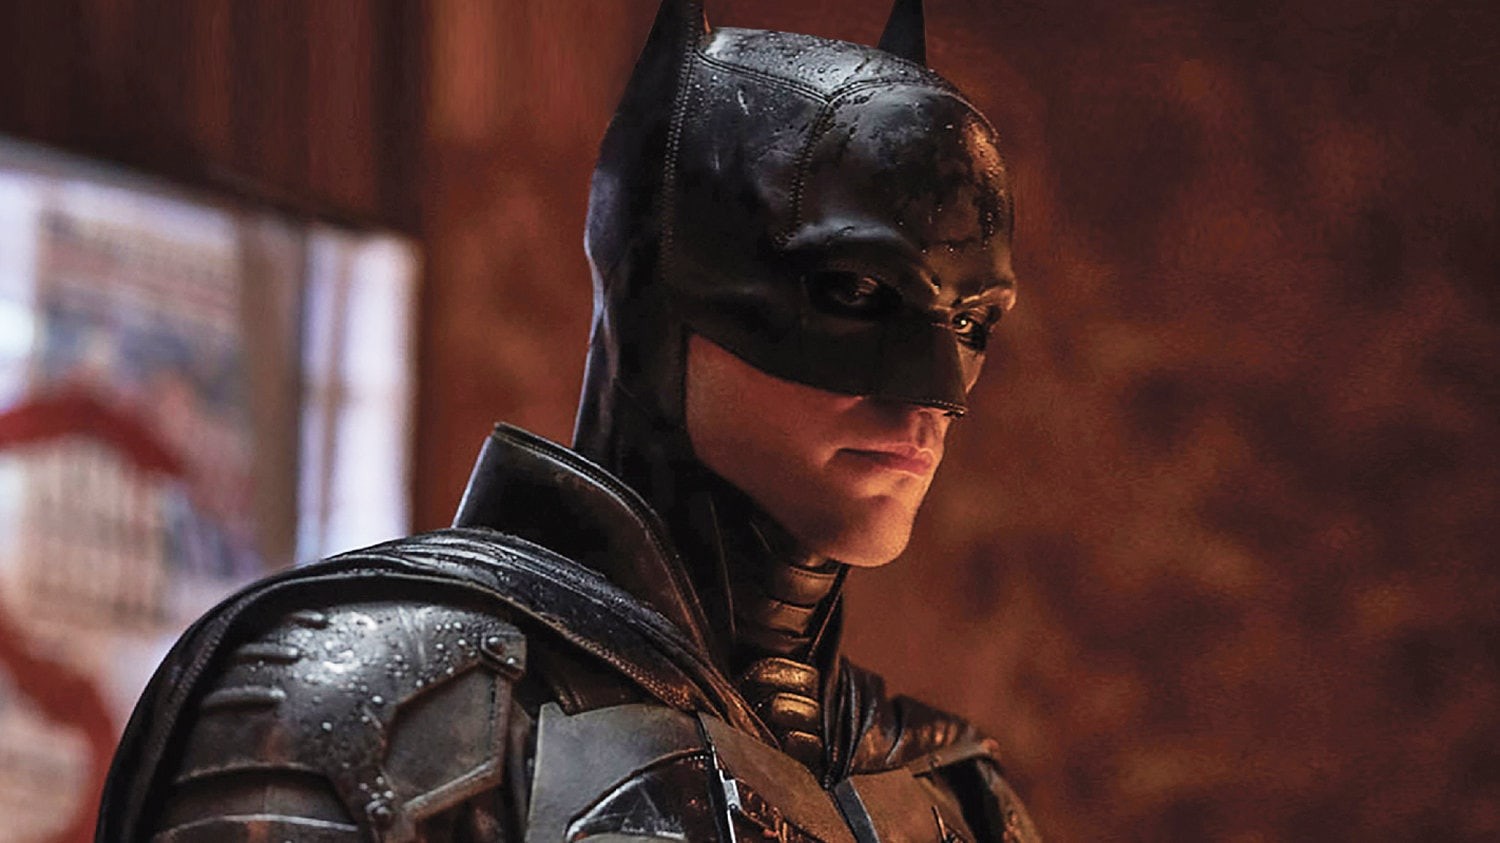 The Batman's Robert Pattinson Suit Will Come With Arkham Trilogy On Switch  - Game Informer